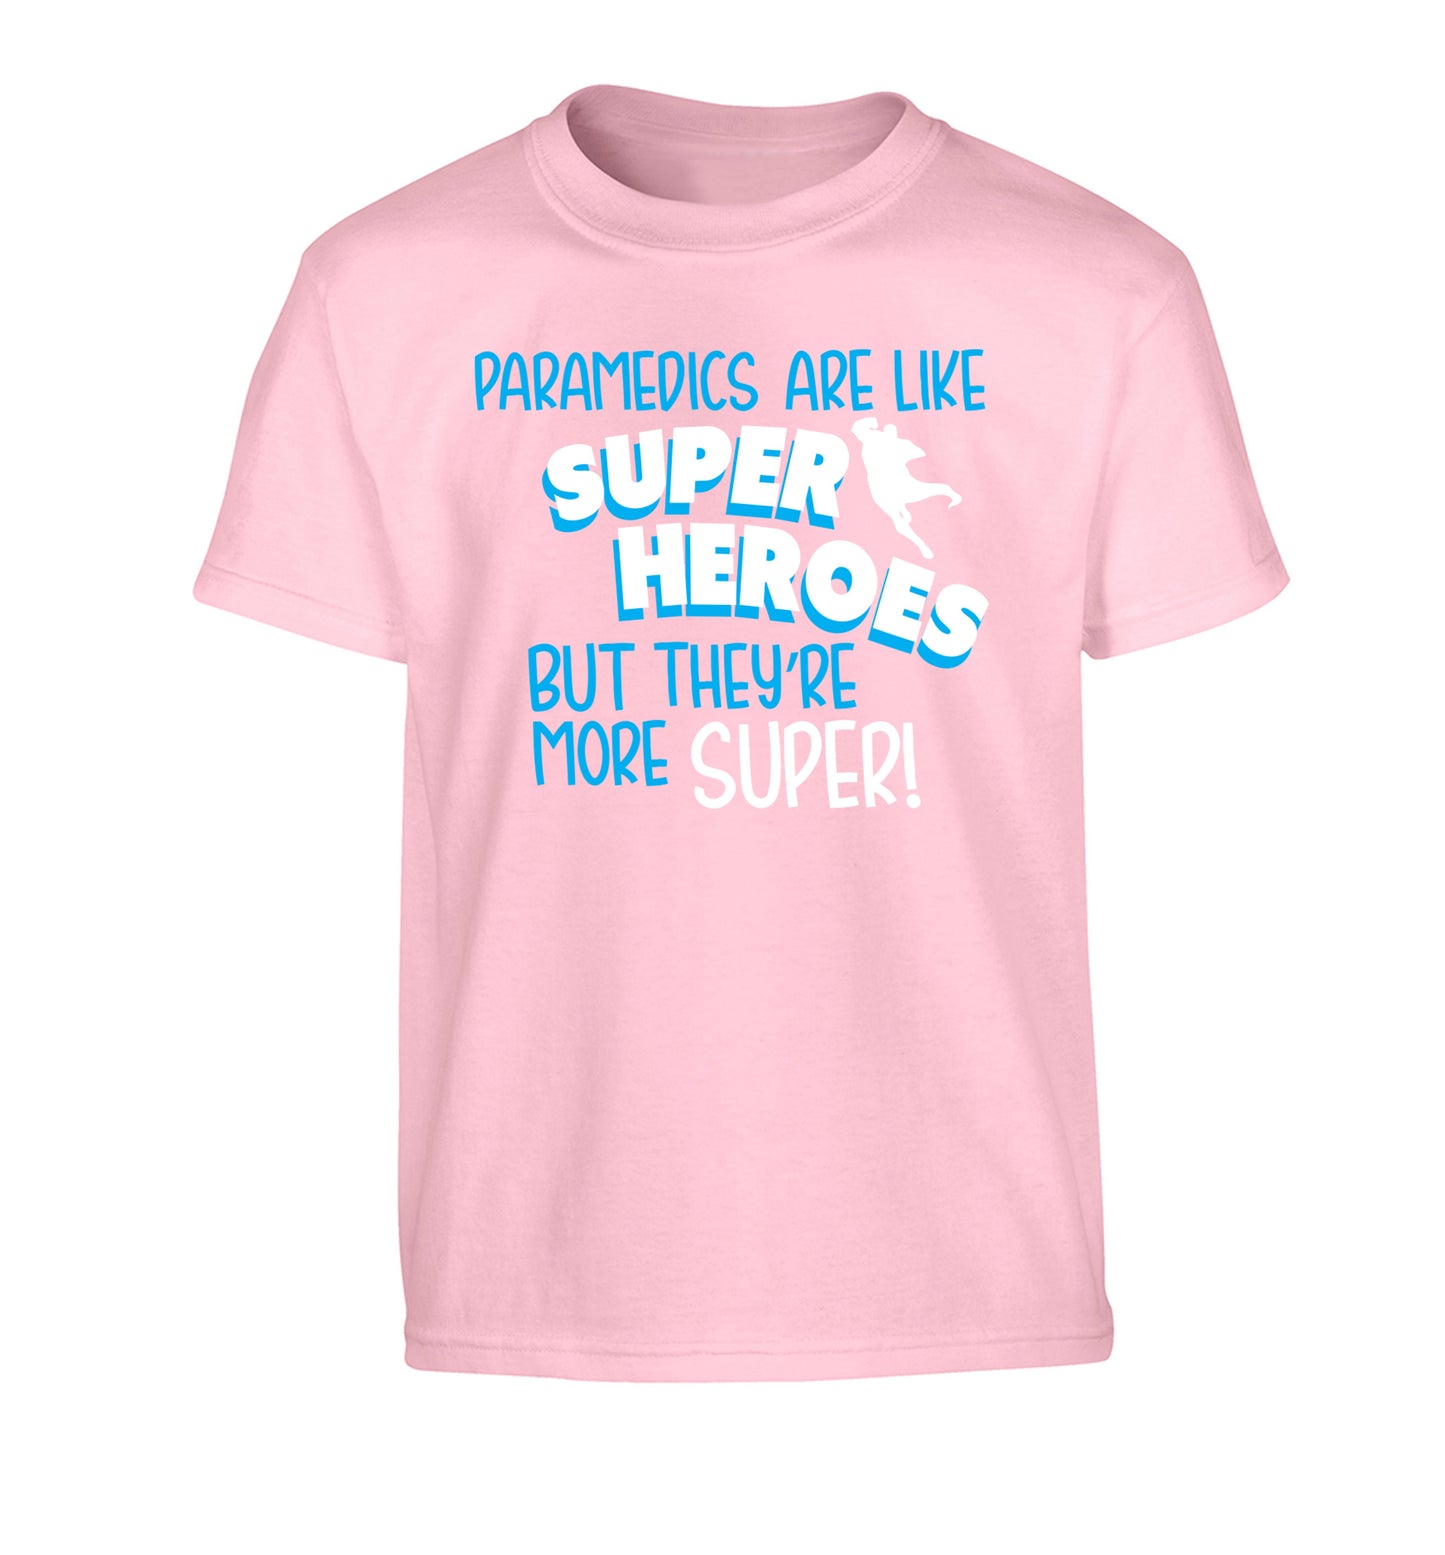 Paramedics are like superheros but they're more super Children's light pink Tshirt 12-13 Years